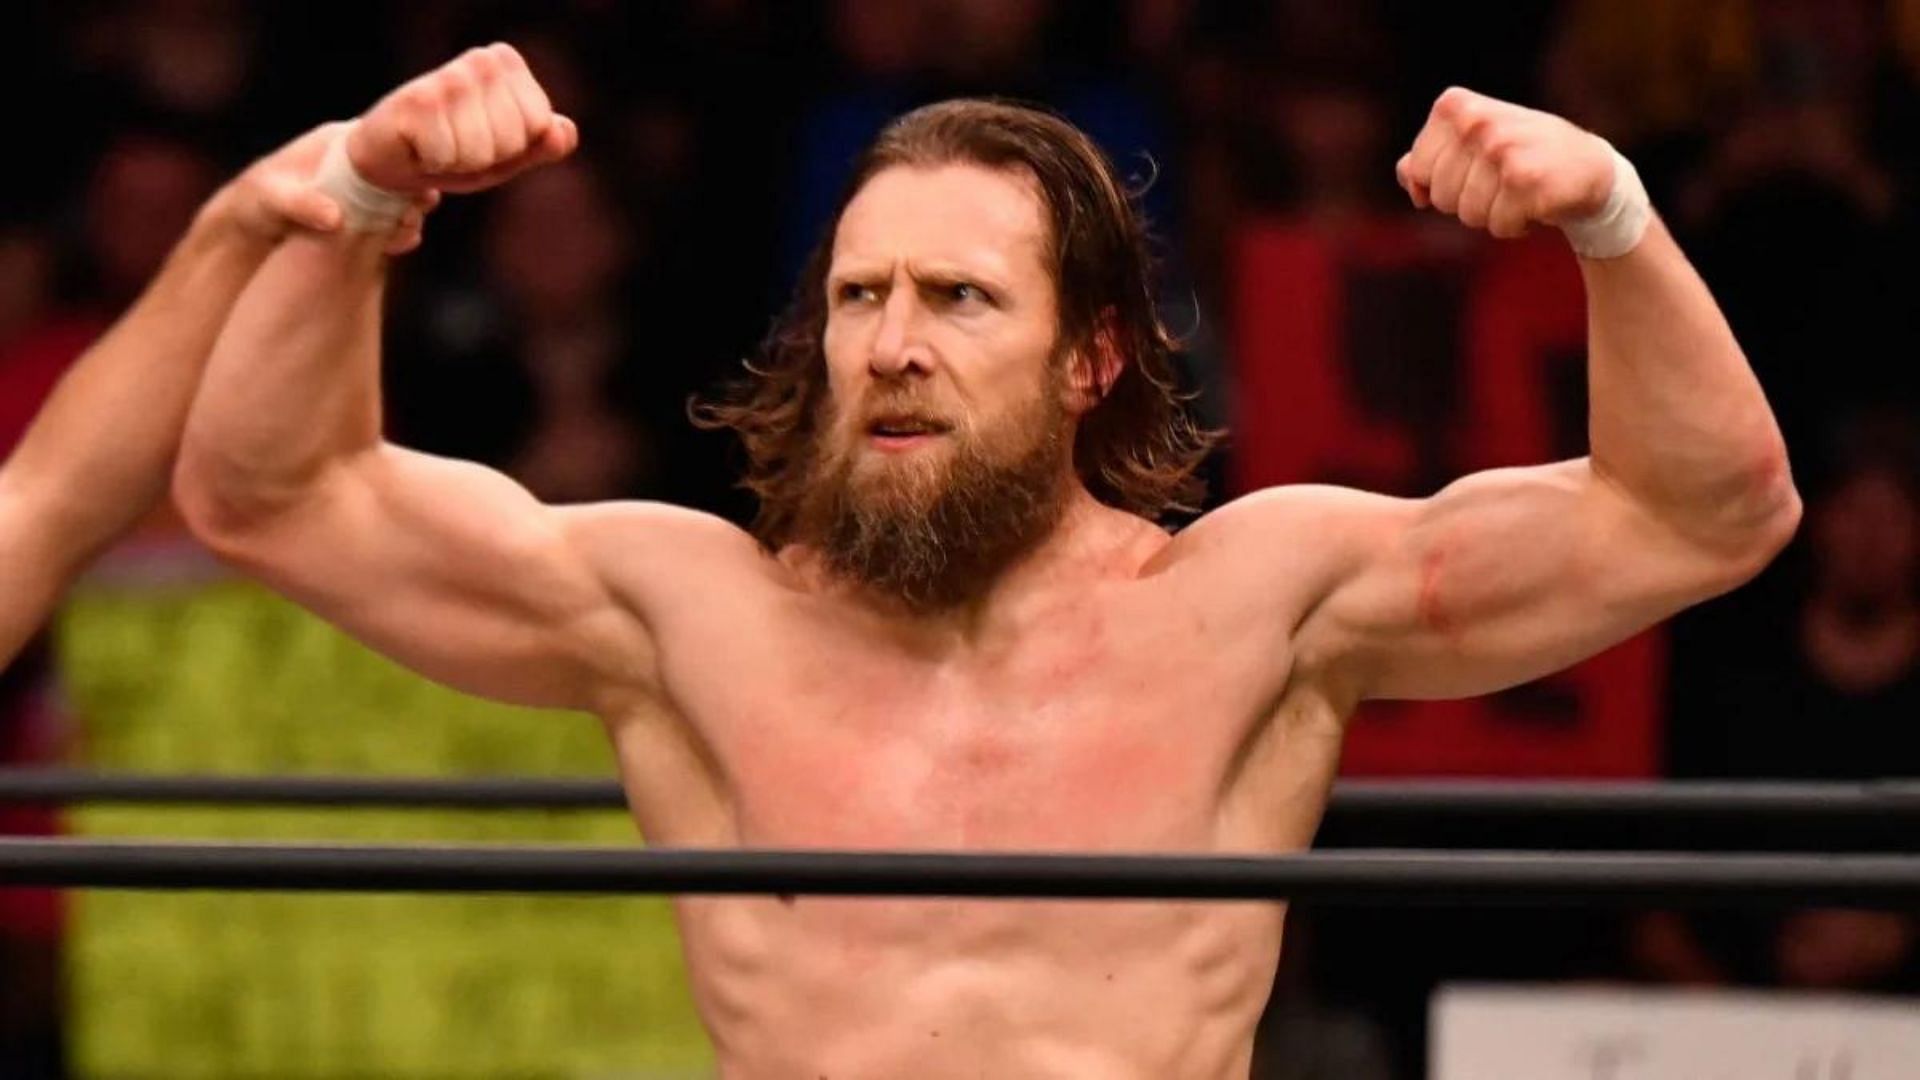 Bryan Danielson is part of the discipline committee that fines stars for misconduct